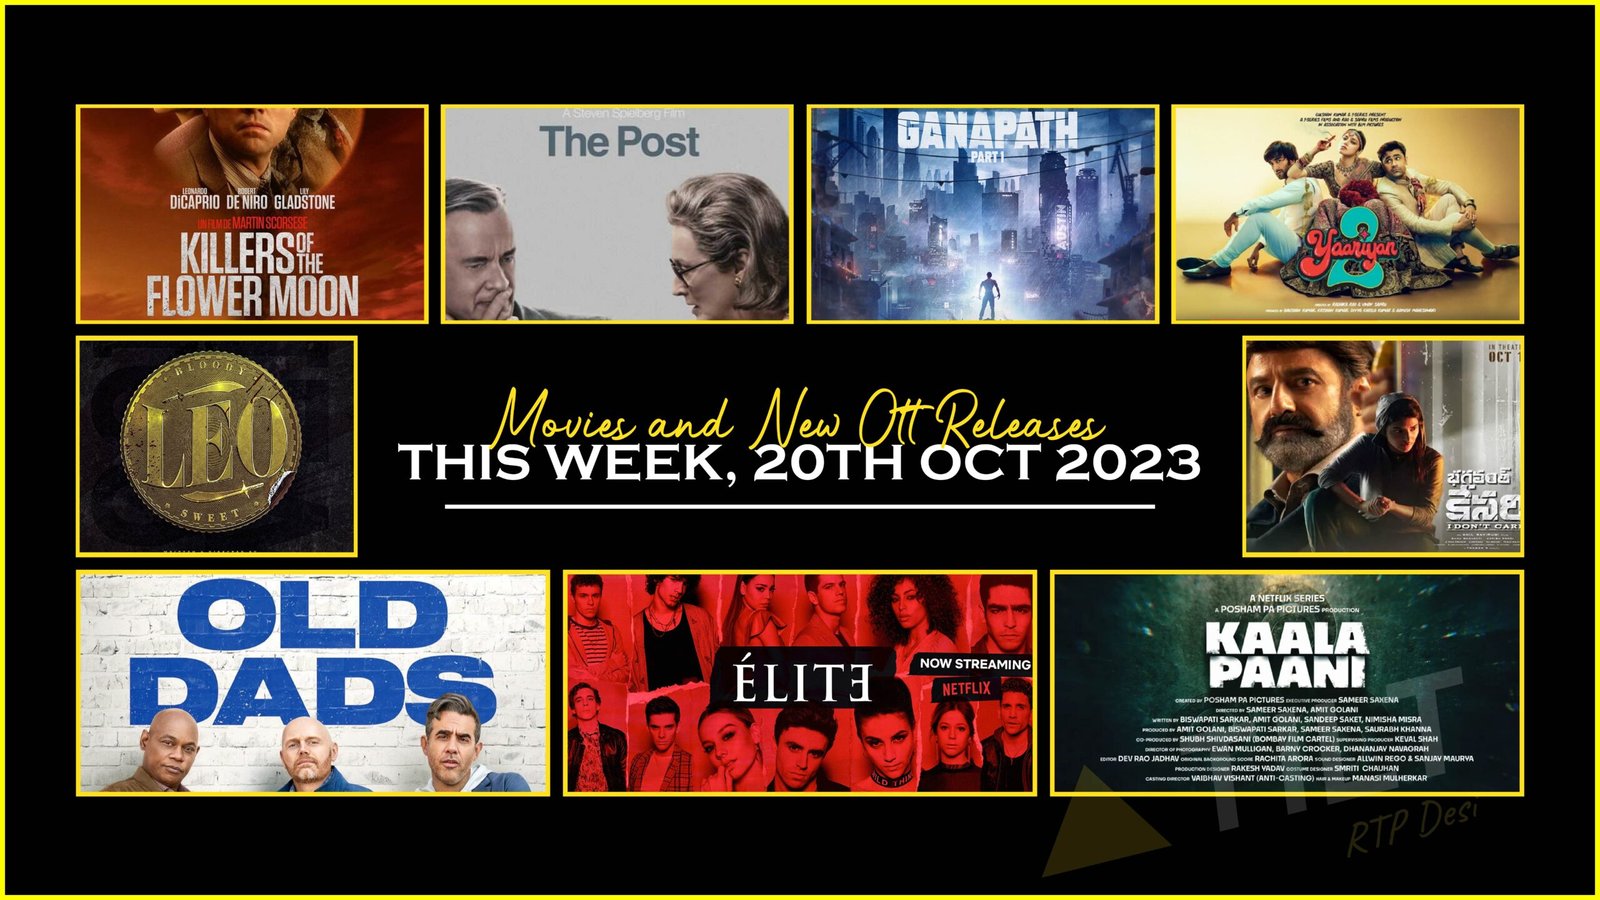 Movies and New OTT Releases this Week, 20th Oct 2023 - Triangle Tilt